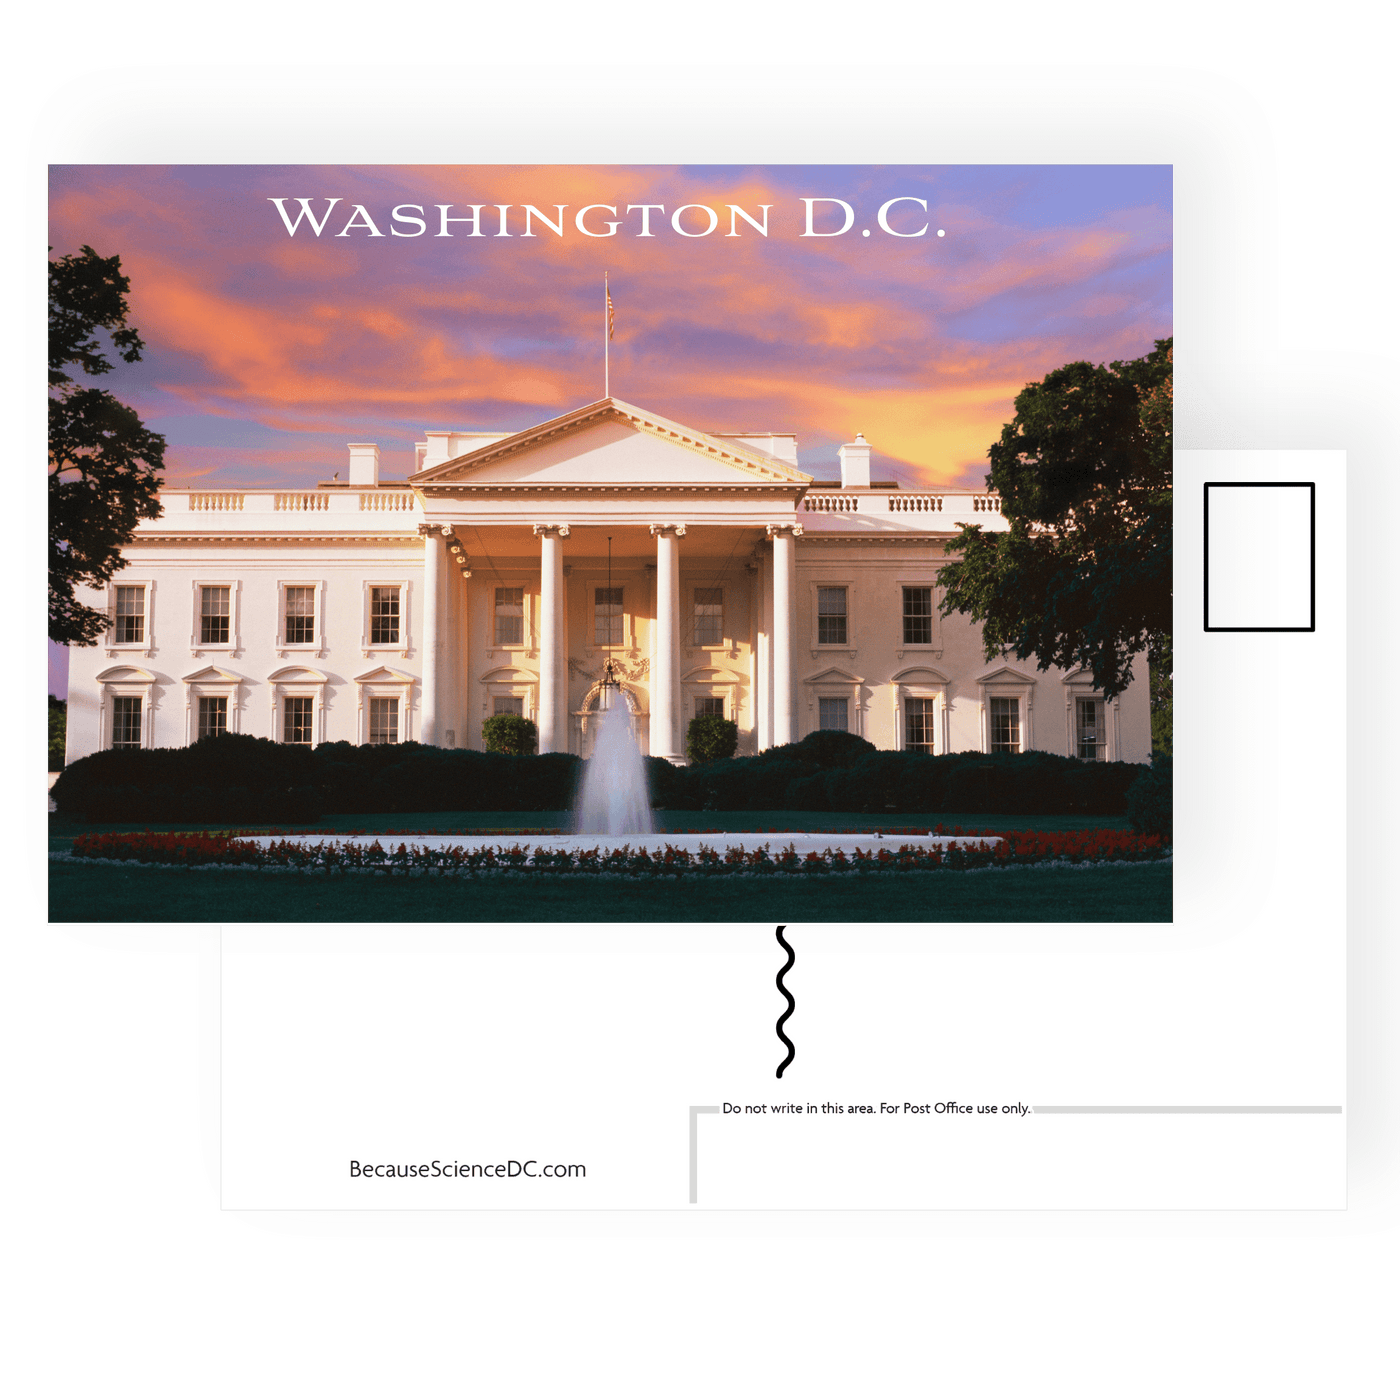 Image of a postcard with a scenic view of Washington, D.C. District of Columbia